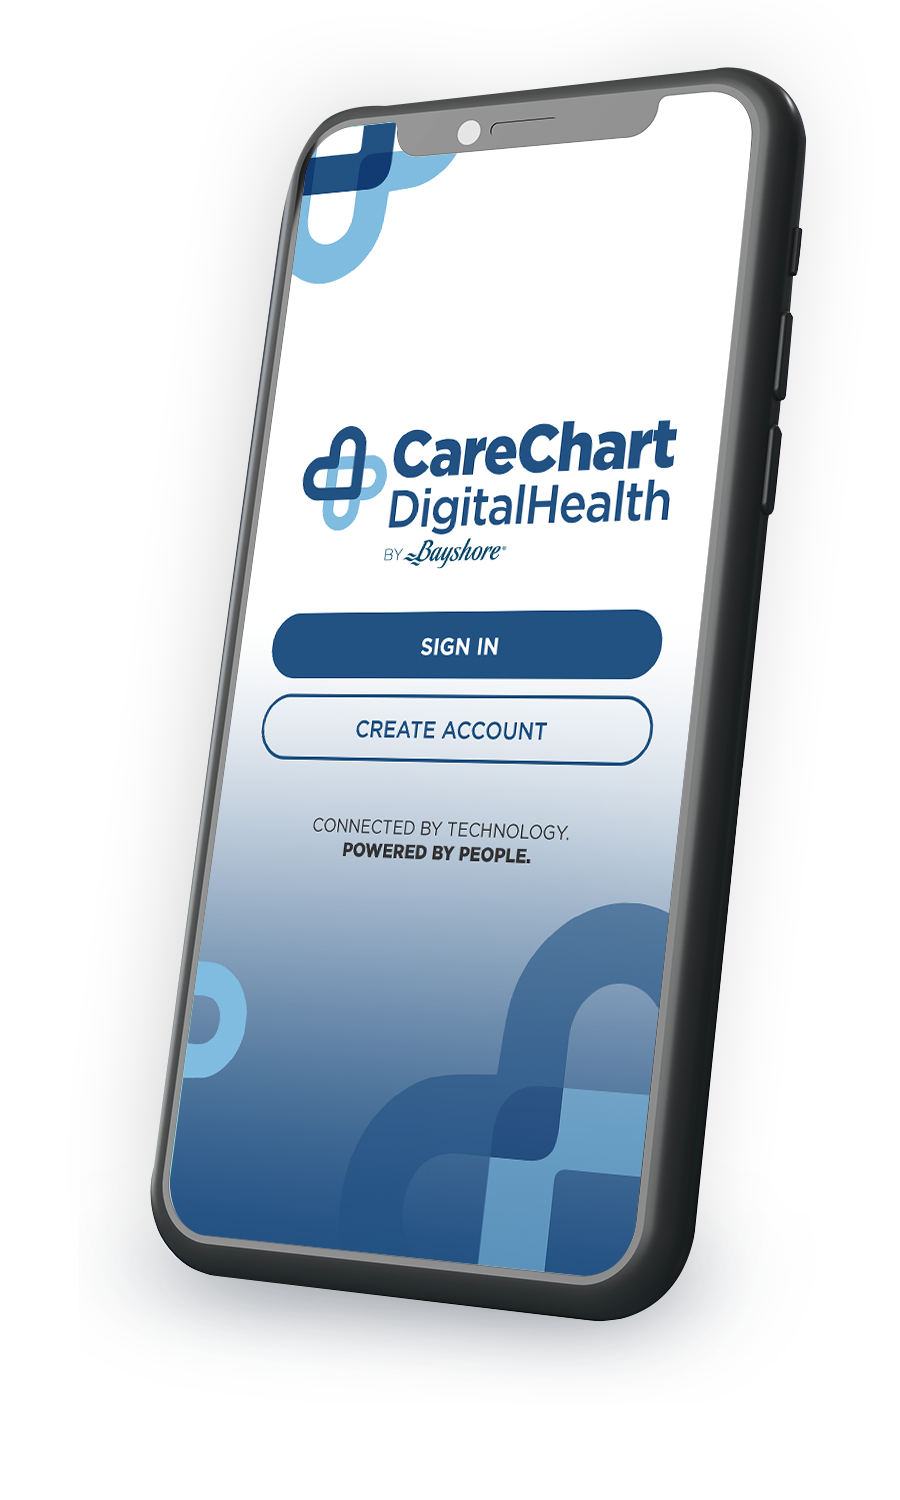 Mobile screen of care chart that shows sign-in and create account buttons. The screen has "Care Chart Digital Health by Bayshore" as the header.